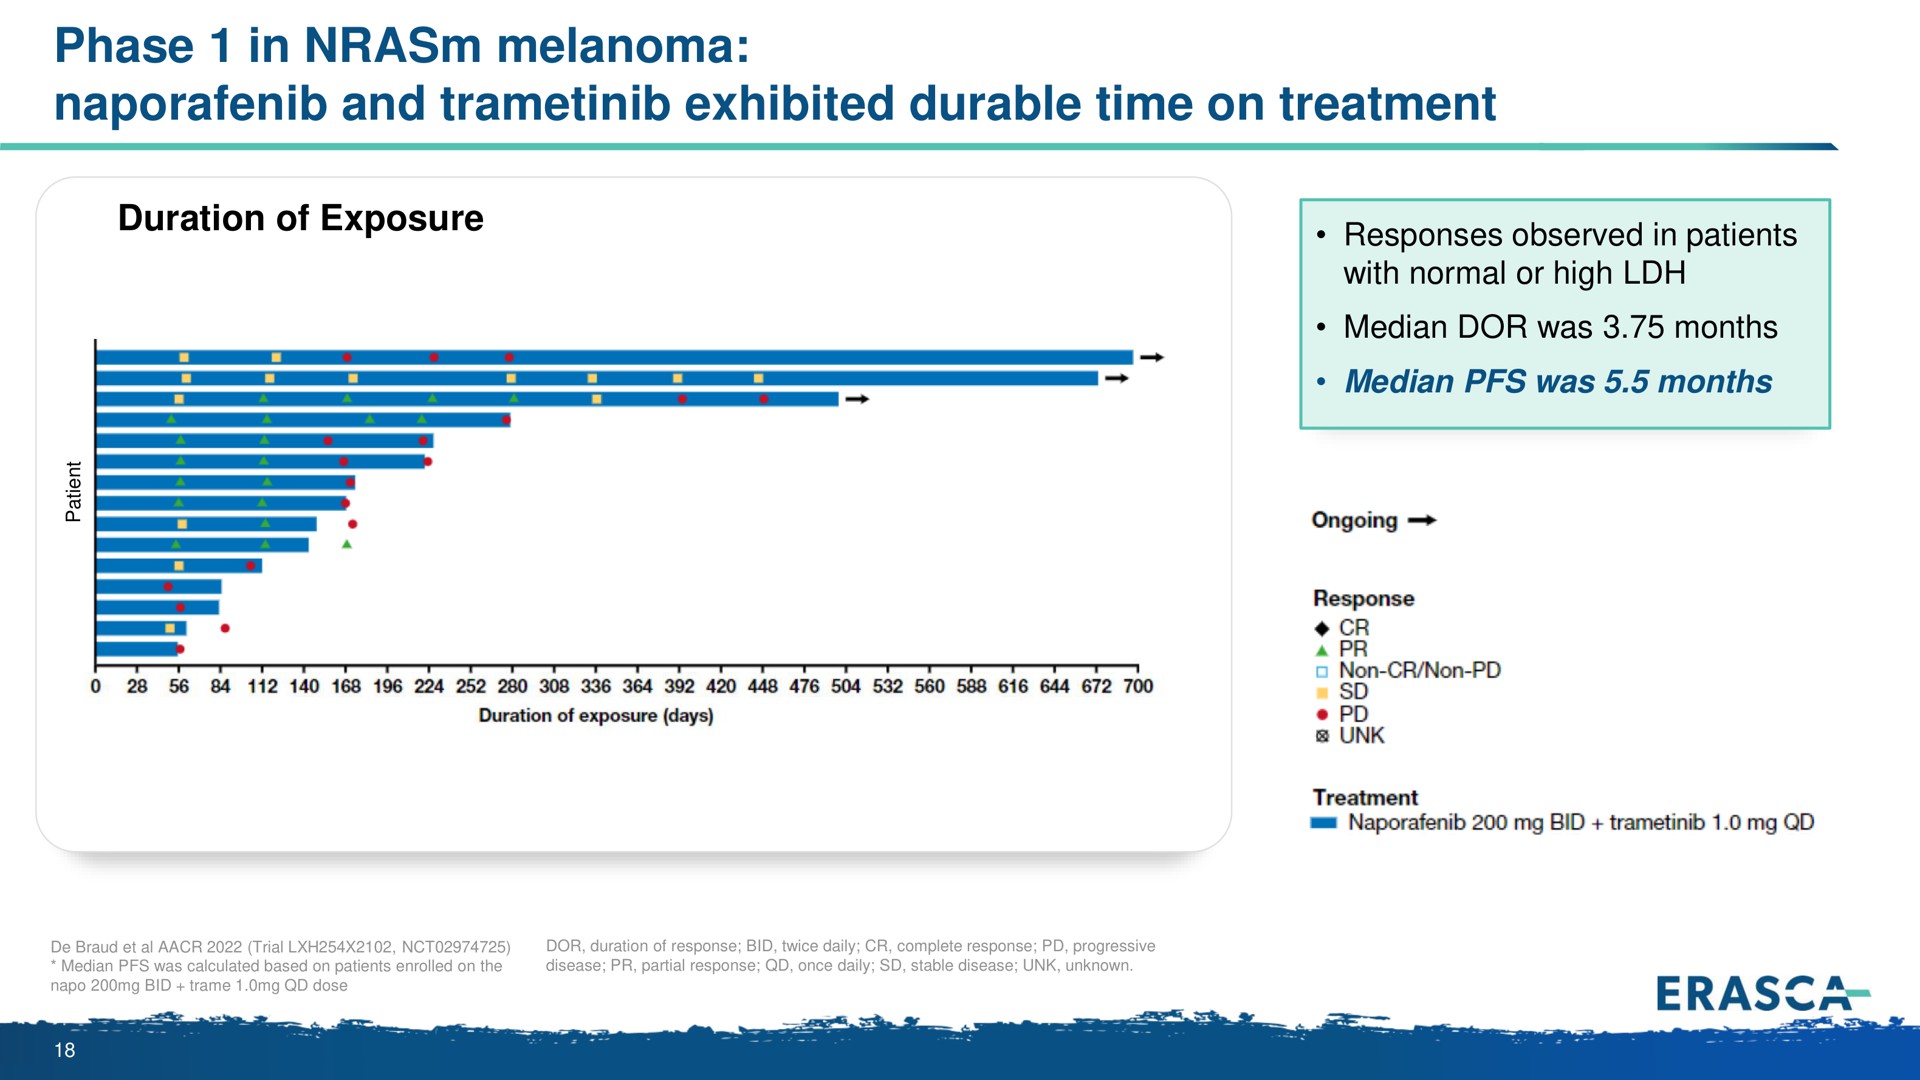 phase in melanoma and exhibited durable time on treatment | Erasca